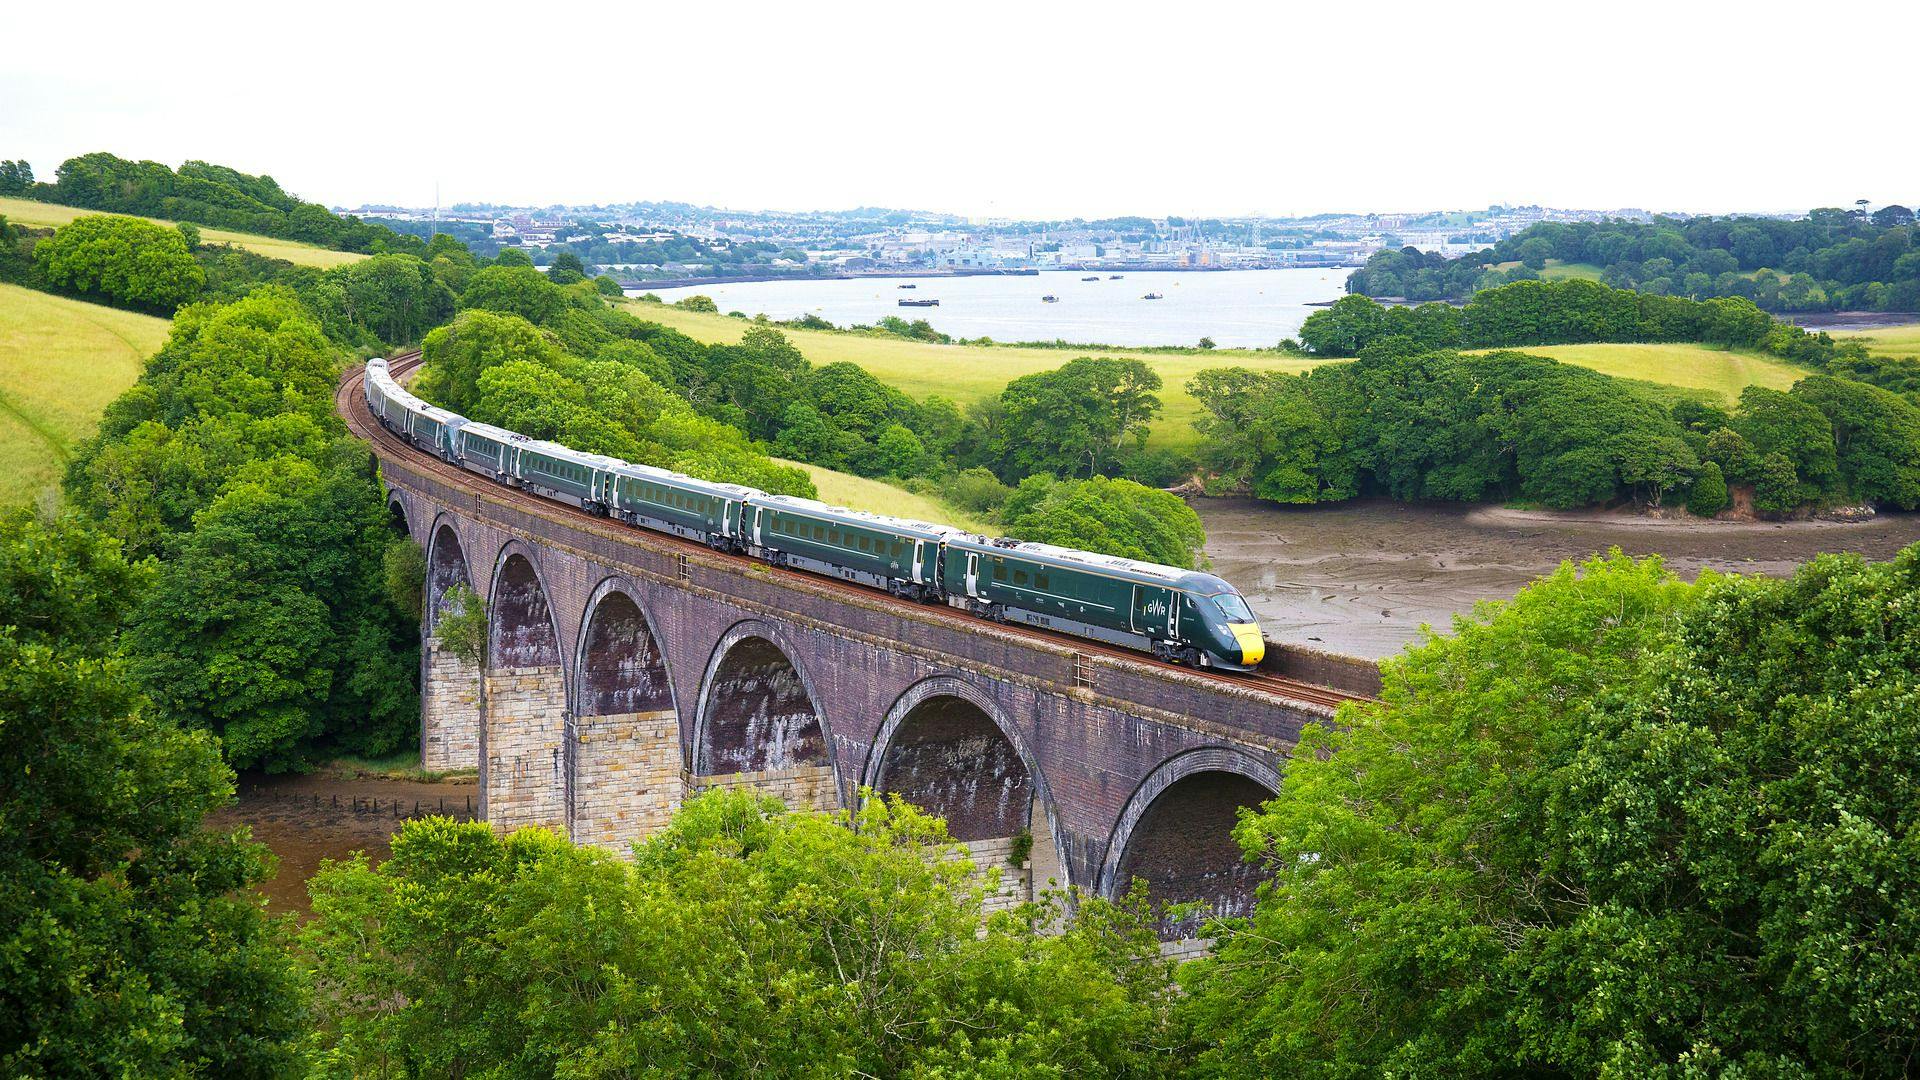 Book your train travel to Cornwall at GWR.com